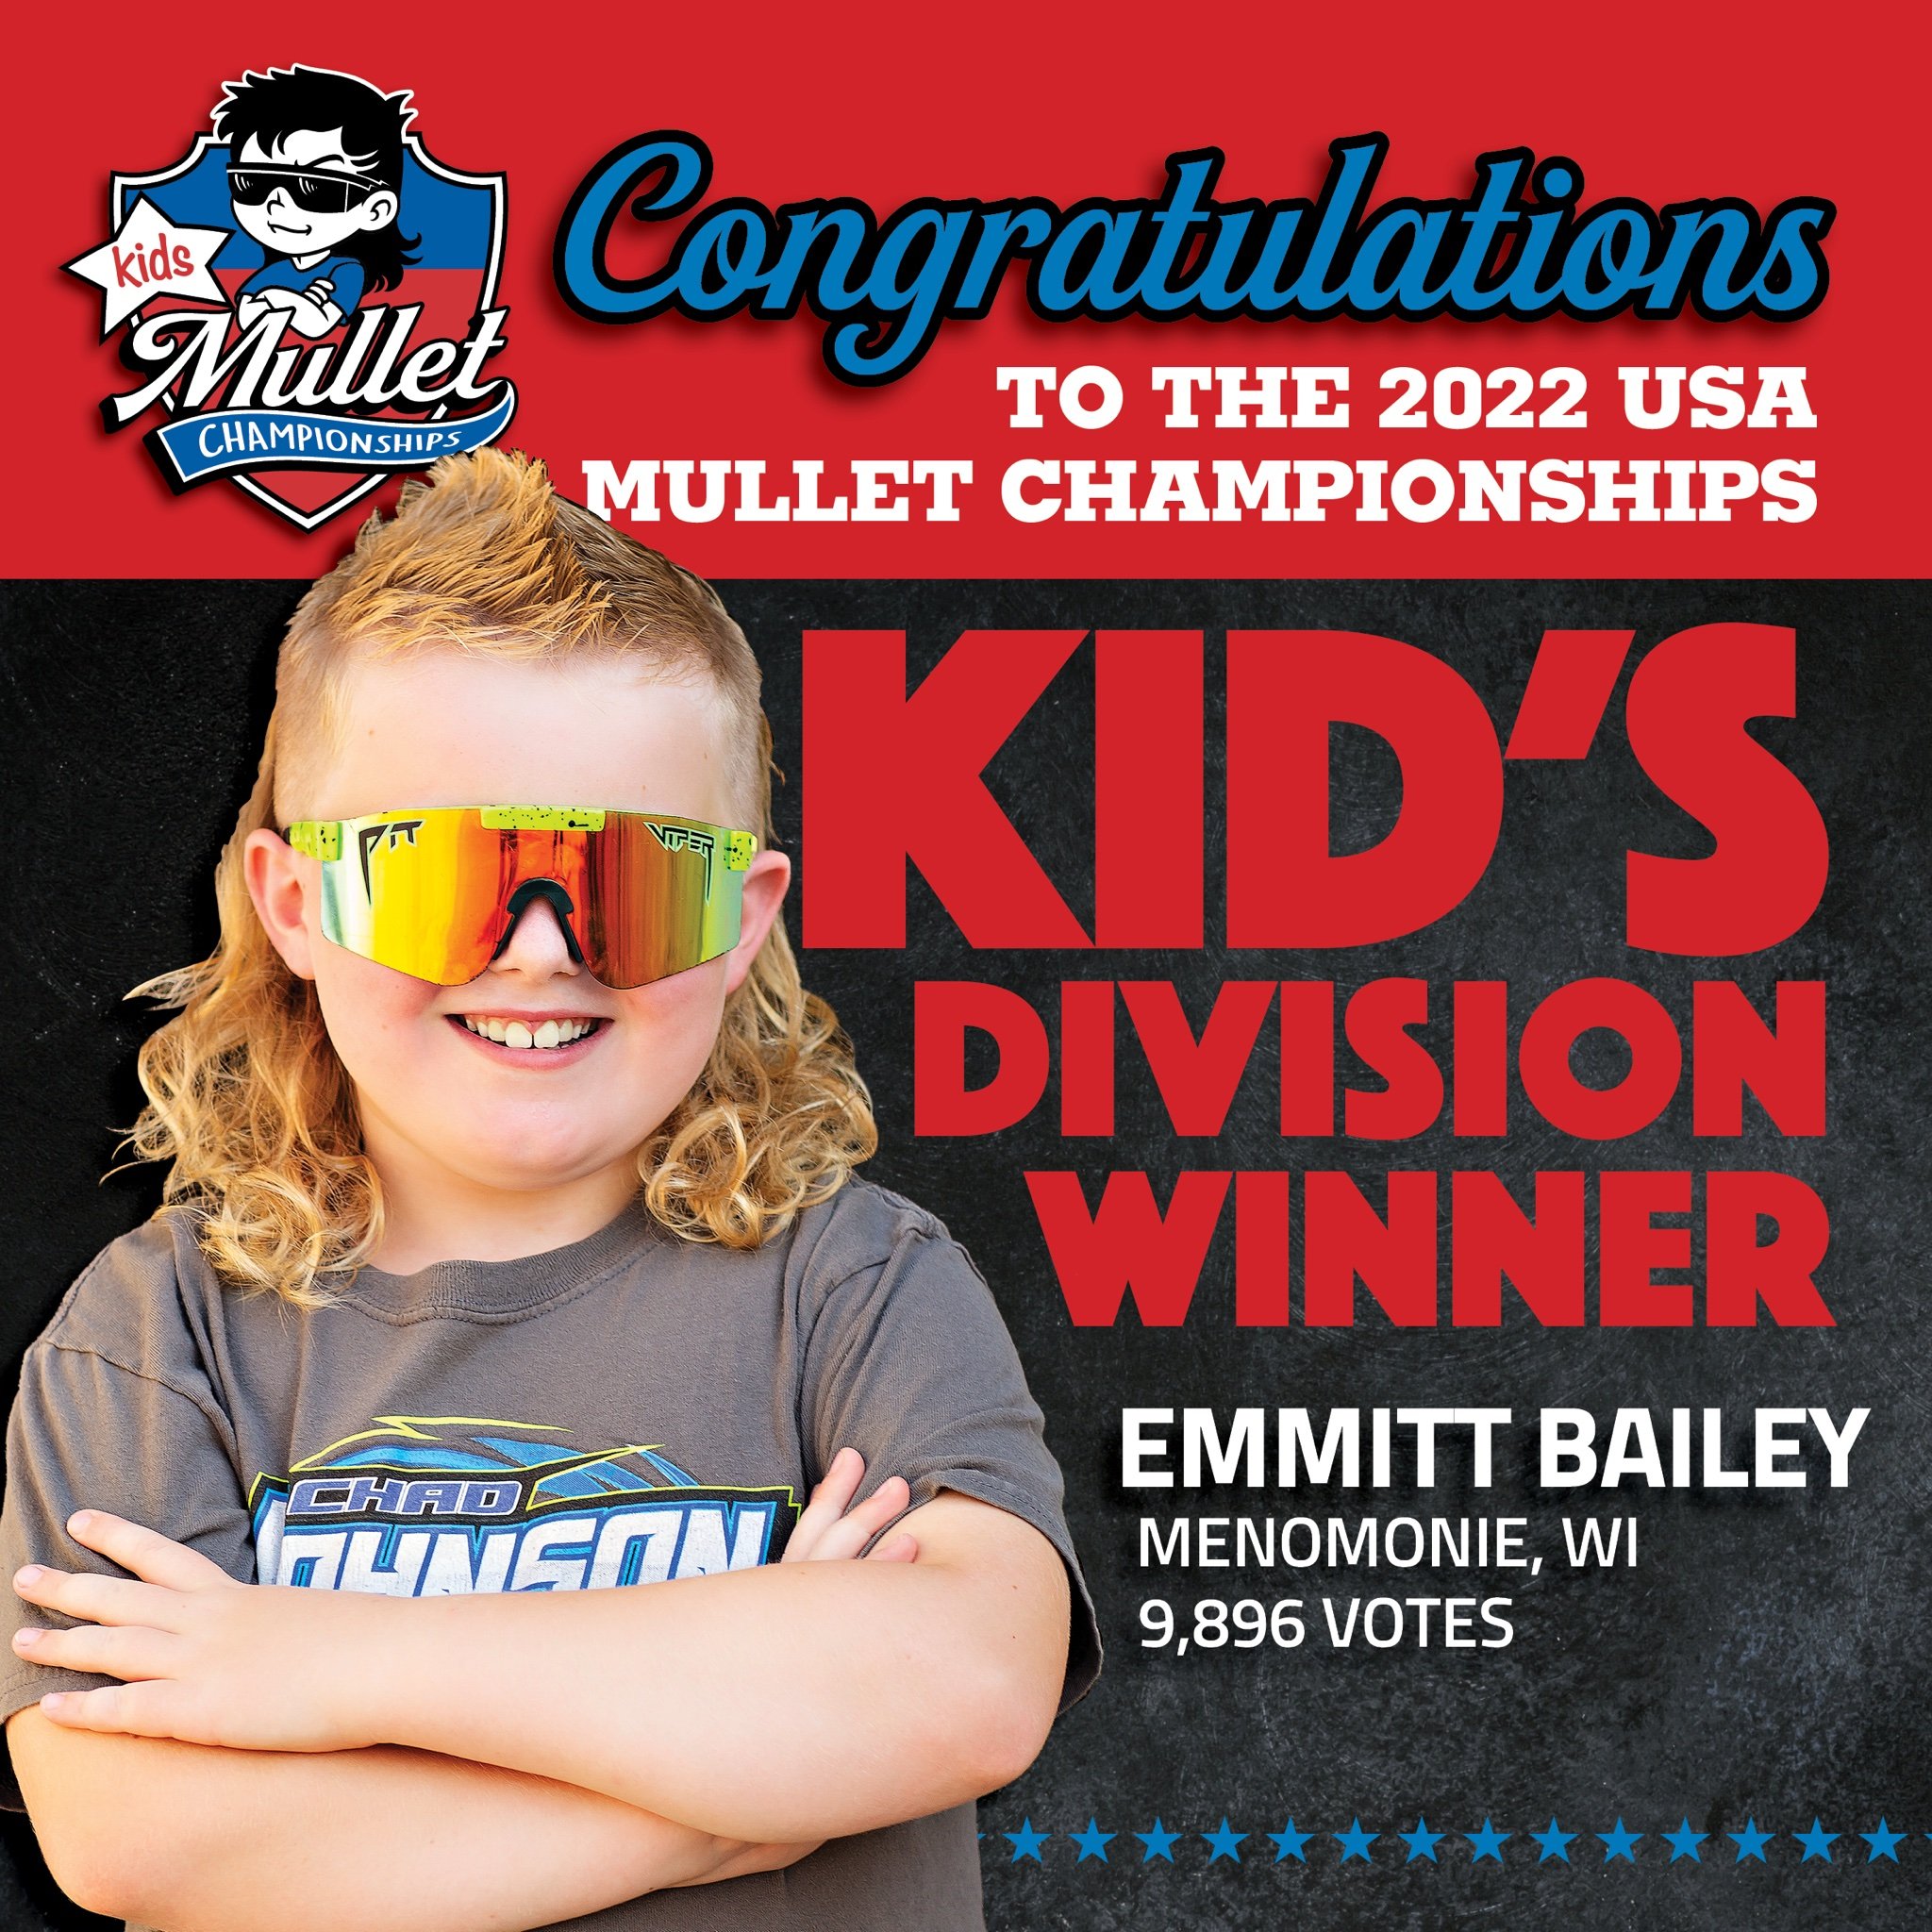 EmVP: Wellsville boy places 13th in USA Mullet Championship